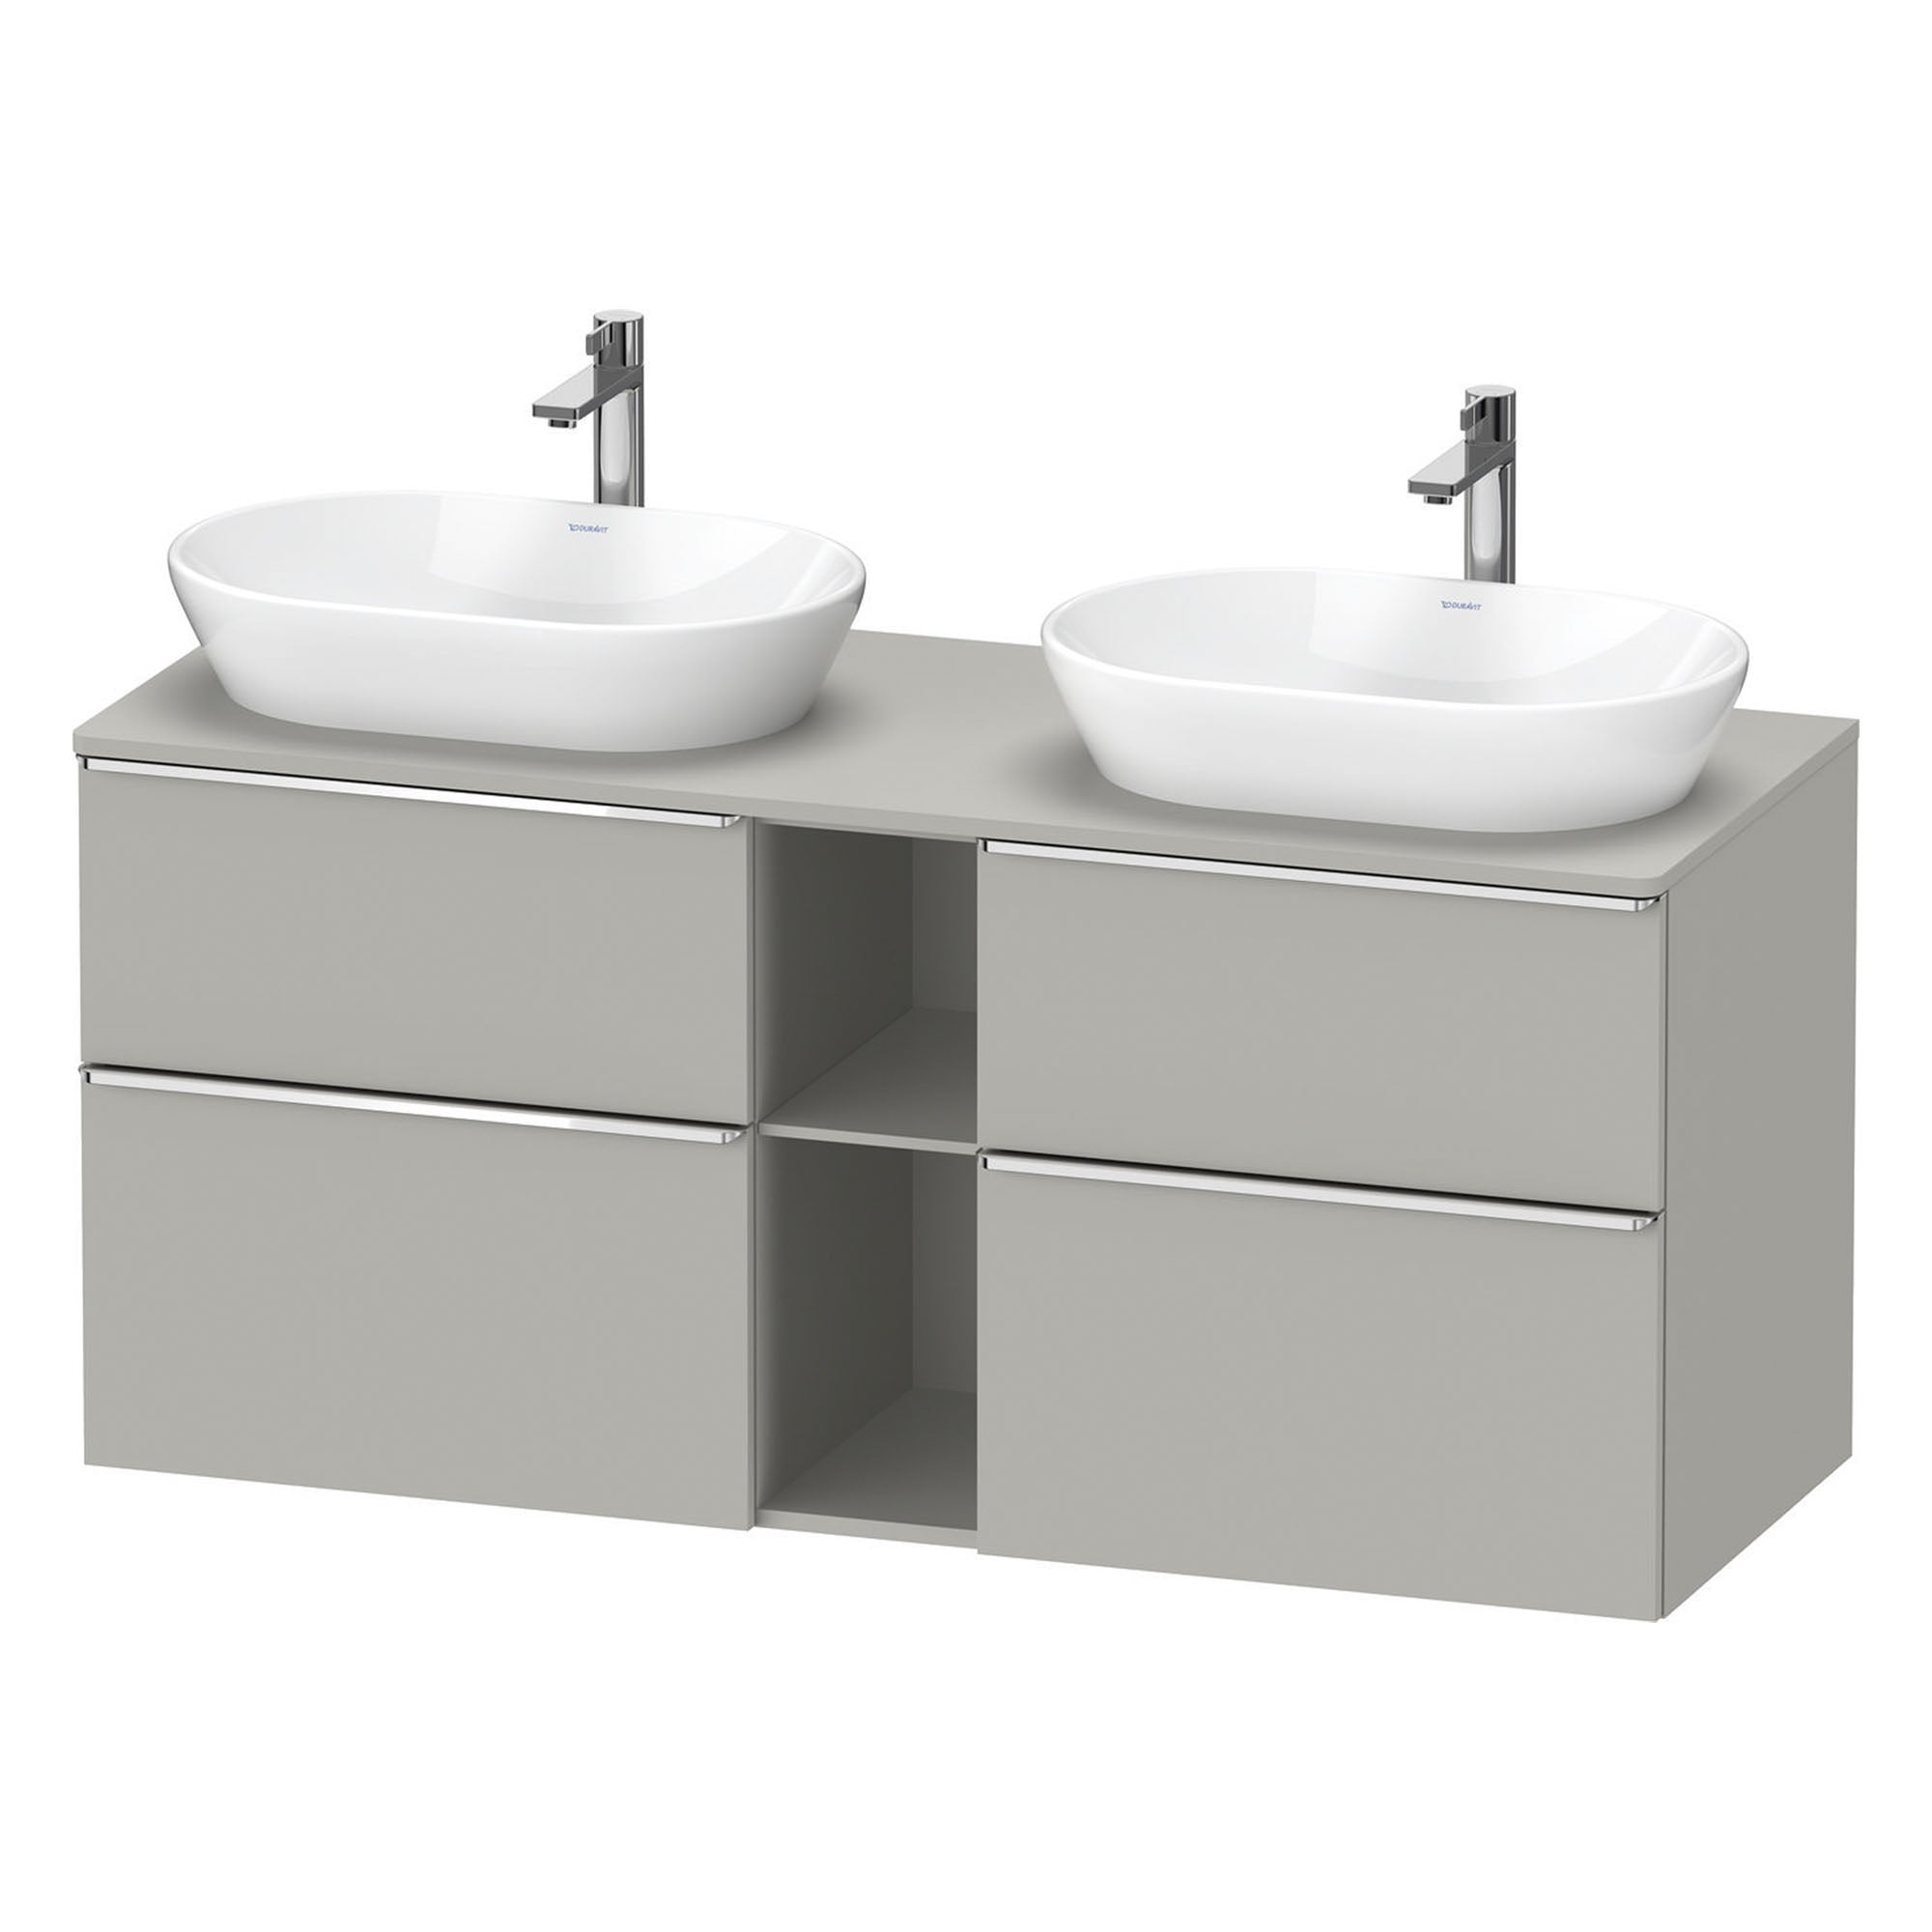 duravit d-neo 1400 wall mounted vanity unit with worktop 2 open shelves concrete grey chrome handles